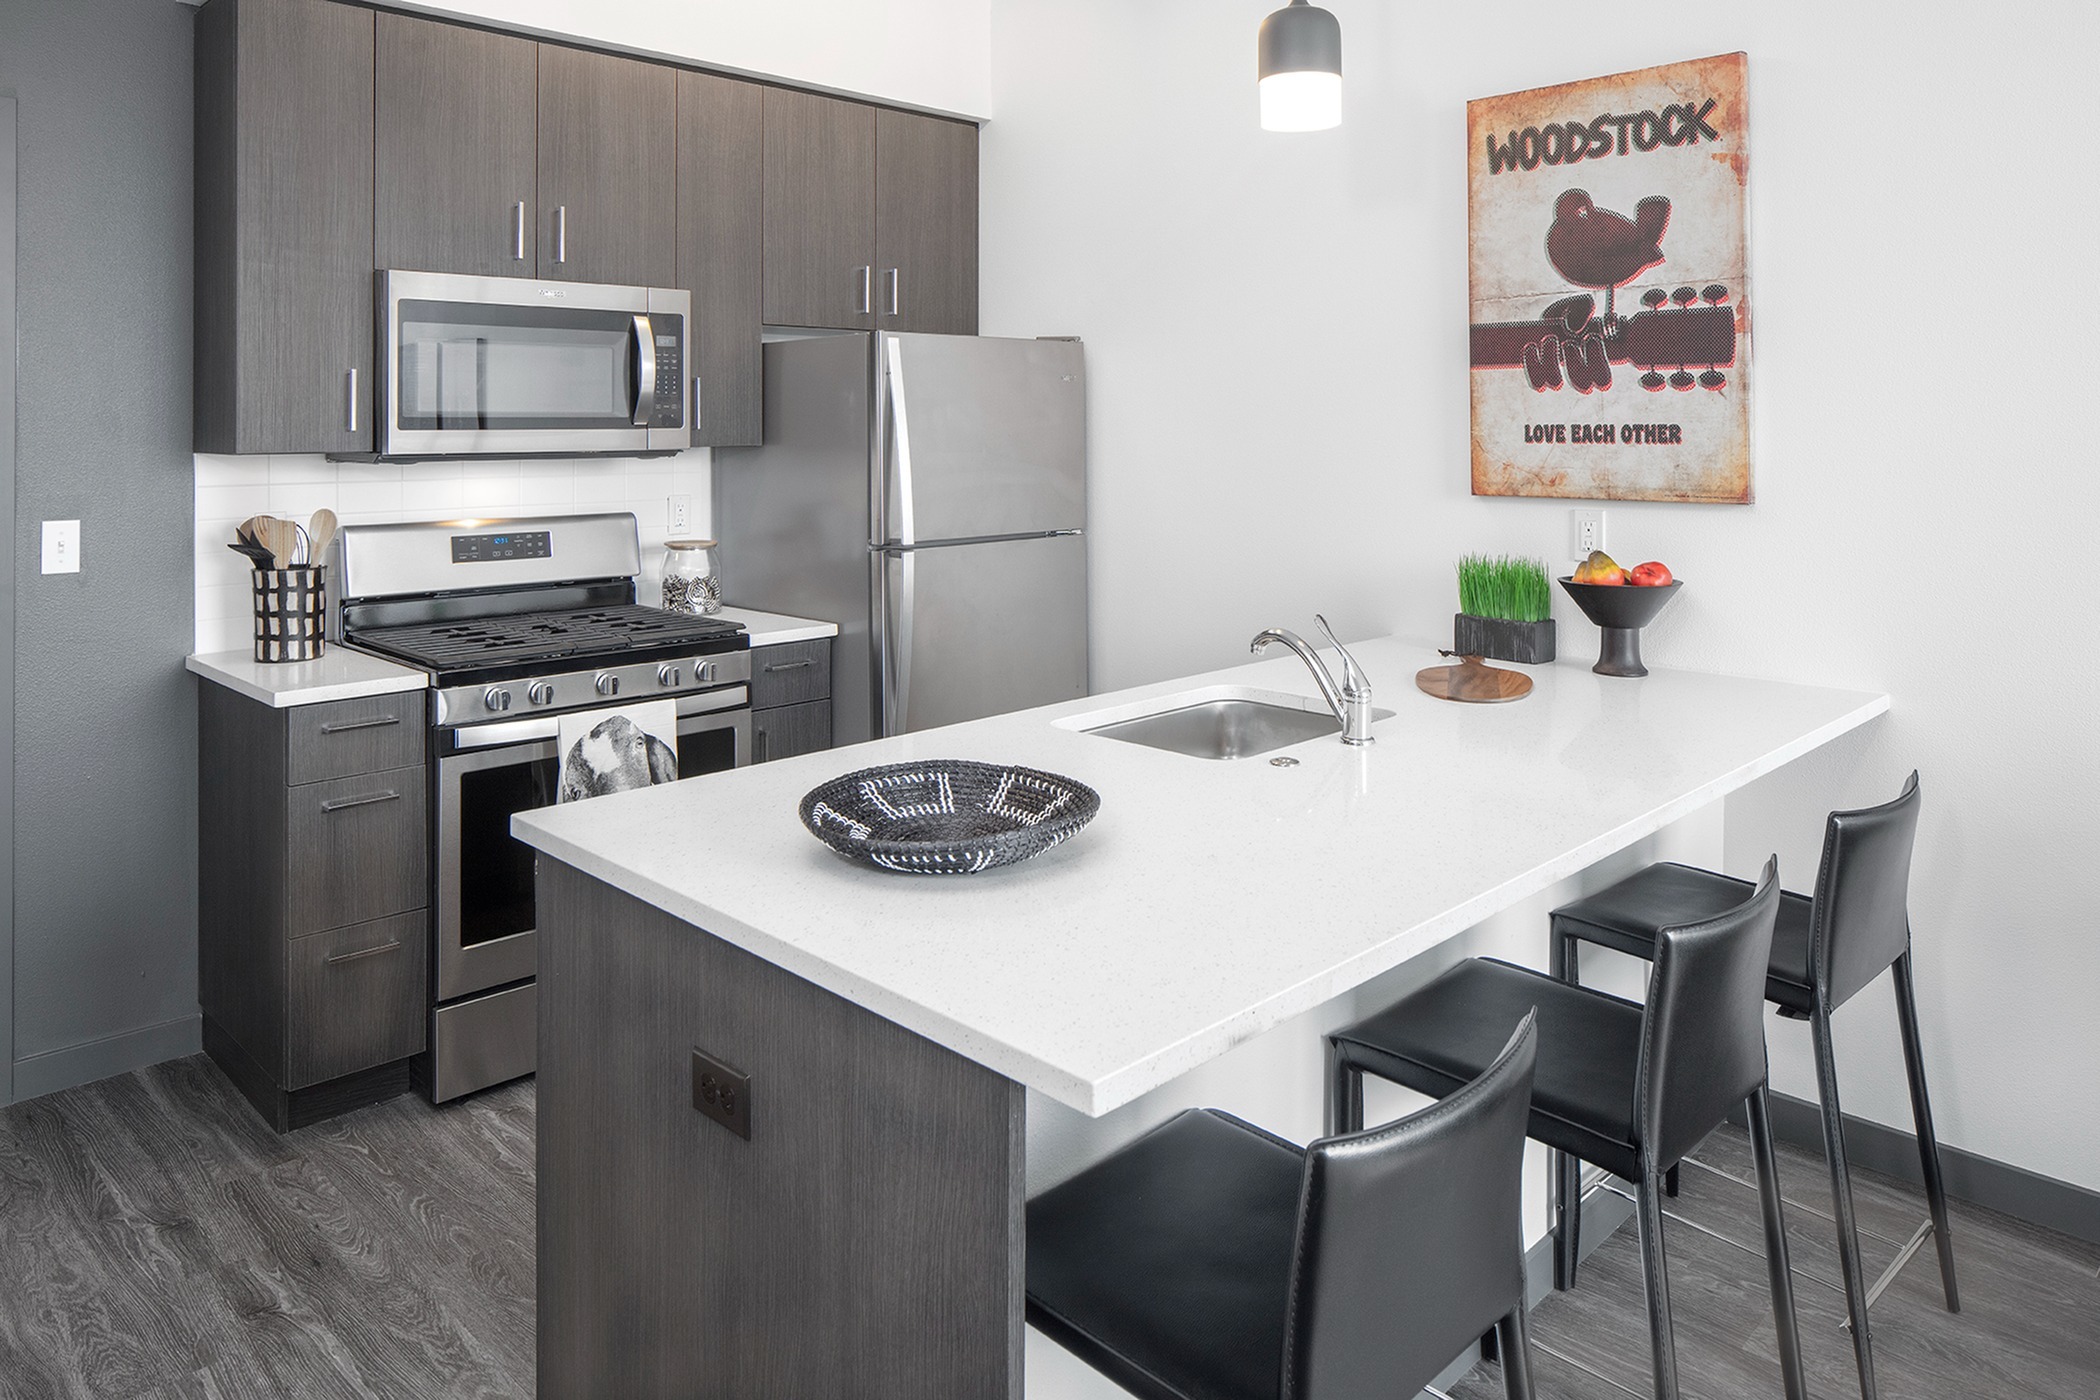 Apartments For Rent Williams District, OR - Kitchen With Breakfast Bar, Quartz Counters, Stainless-Stell Appliances, And Vinyl Wood Flooring.